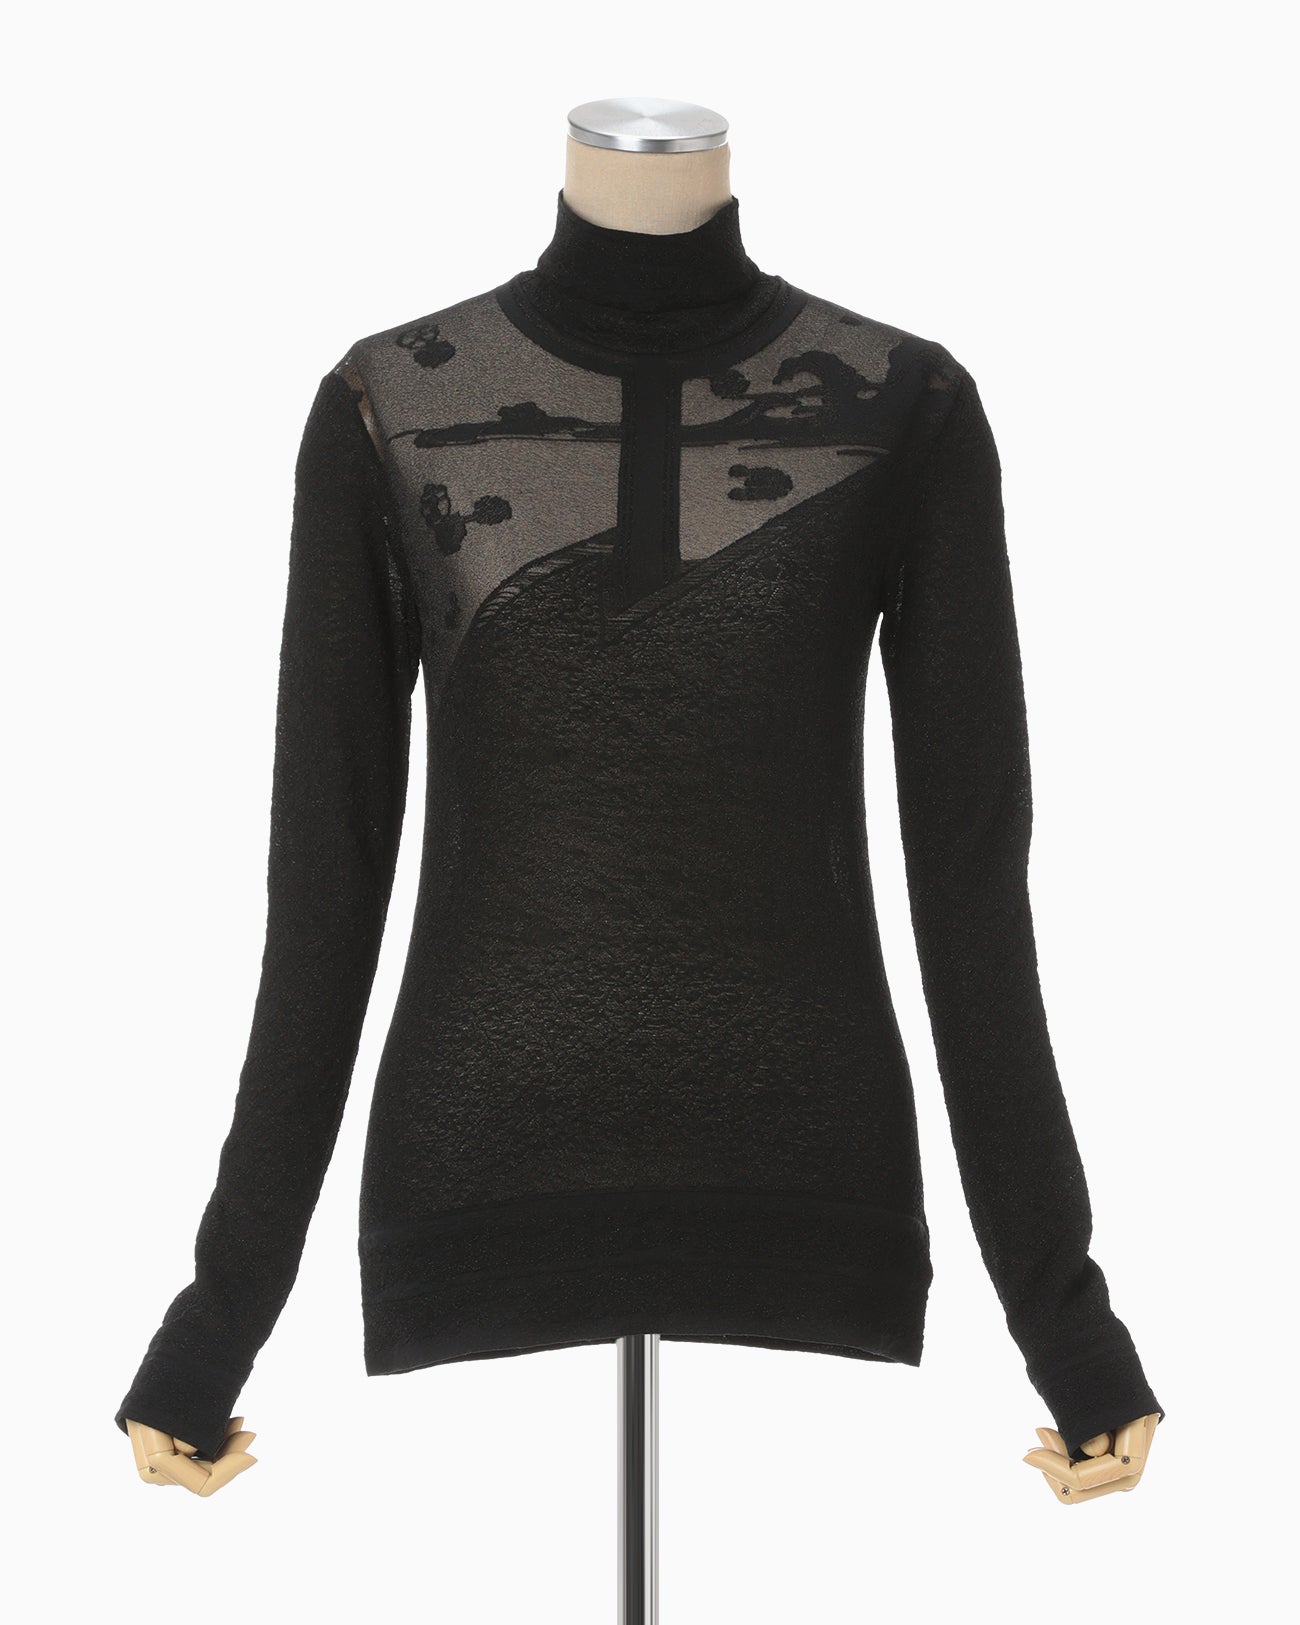 Landscape Graphic Sheer Knitted High Neck Top - black - Mame 